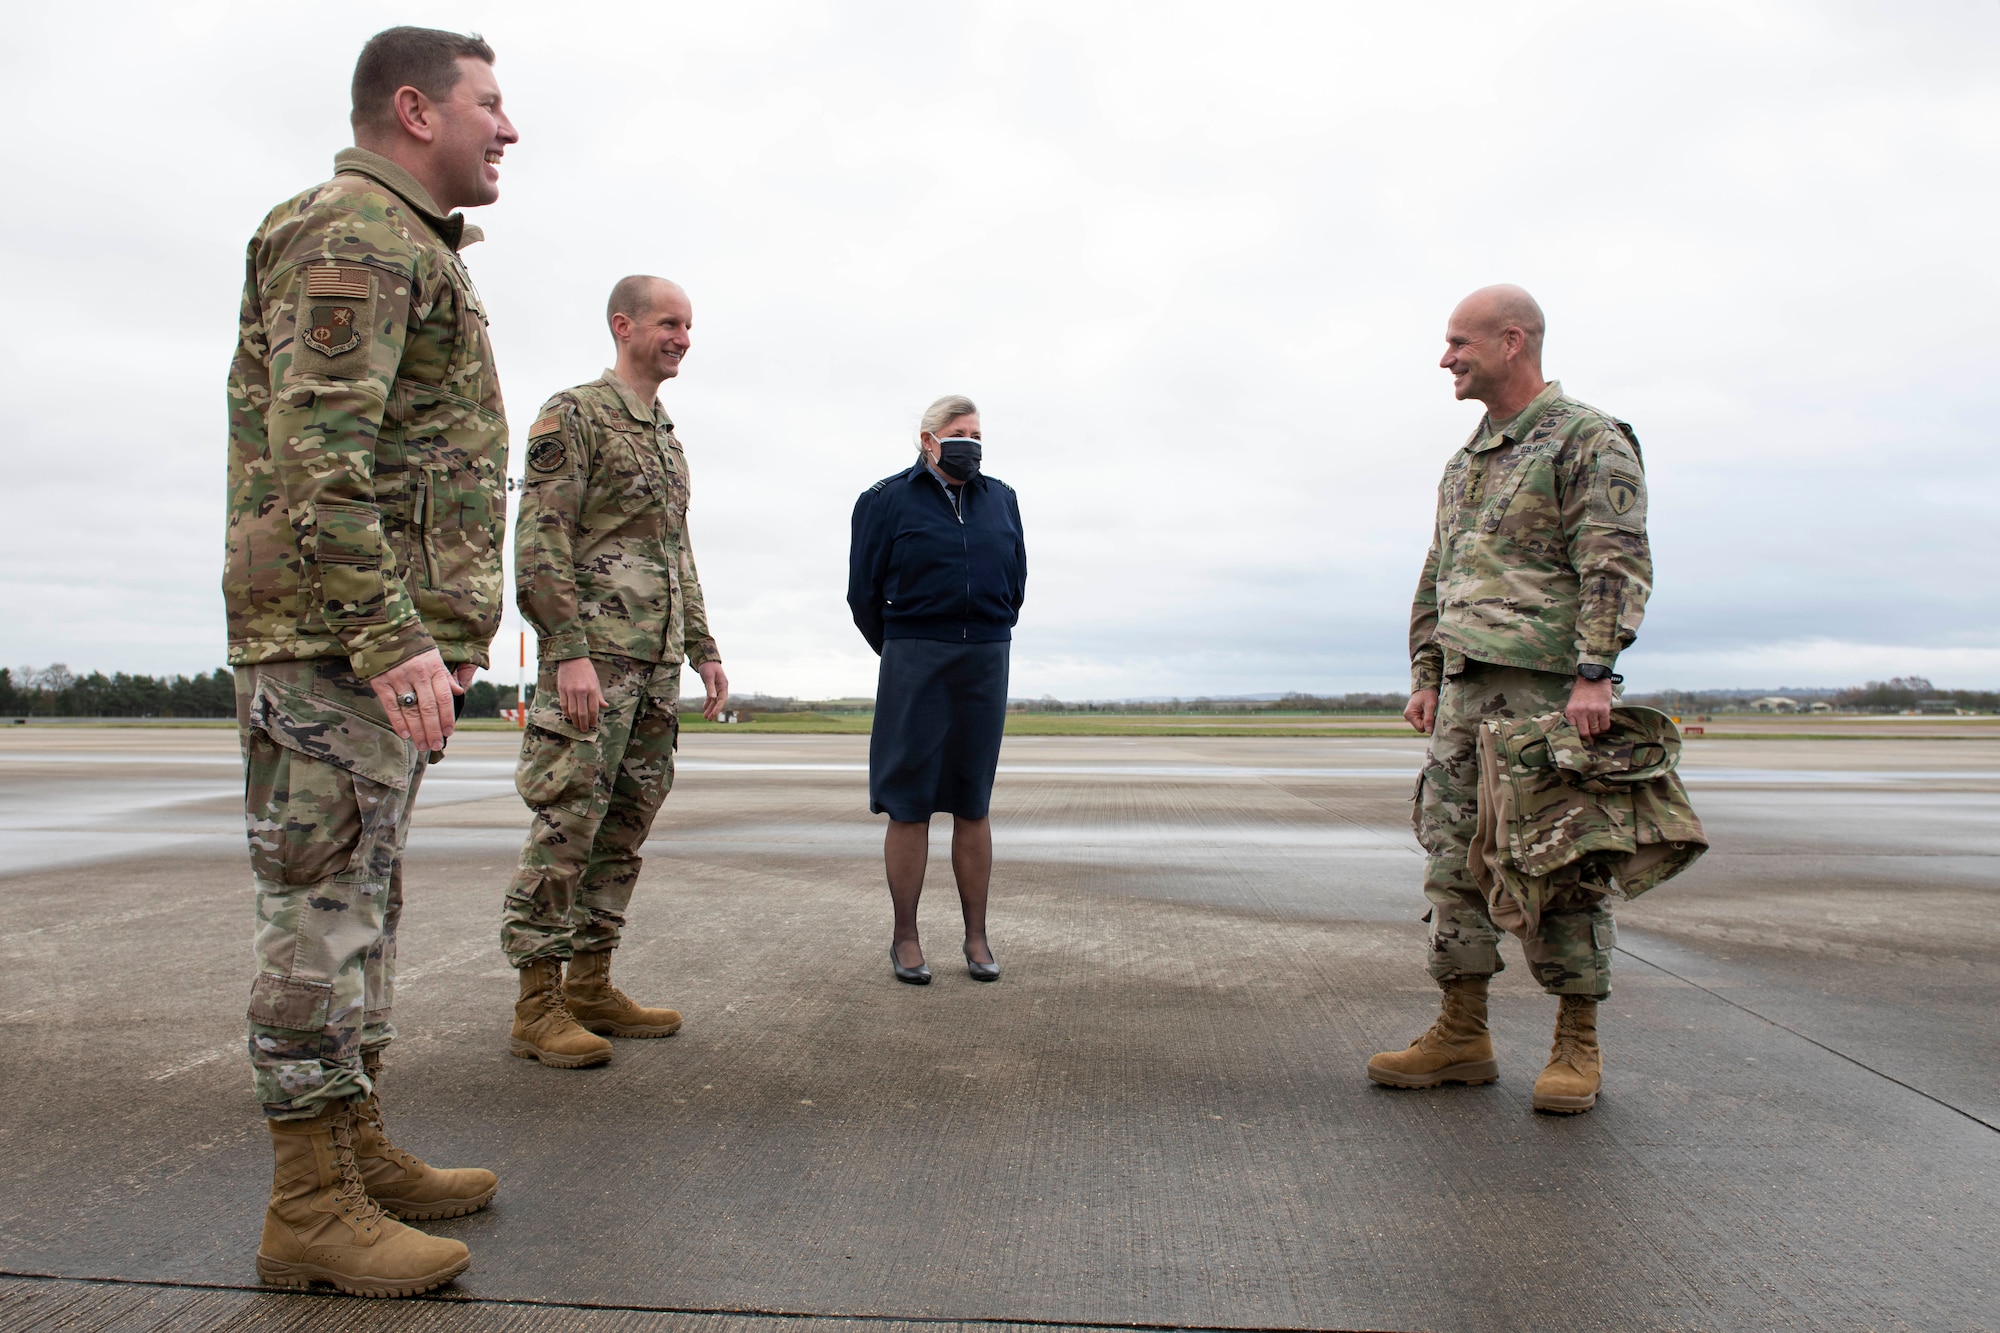 U.S. Army Gen. Christopher Cavoli, right, U.S. Army Europe and Africa Commanding General, arrives at Royal Air Force Fairford, England, Nov. 17, 2020, in support of NATO Exercise Loyal Leda 2020 (LOLE20). Allied Land Command (LANDCOM) conducted a combat readiness evaluation on the NATO Headquarters Allied Rapid Reaction Corp (ARRC) during LOLE20, which took place at RAF Fairford and South Cerney, England, Nov. 9-19, 2020. This was a complex multi-domain exercise designed to test the war-fighting capabilities of the ARRC in a COVID-19 environment including combat operations. LOLE20 was a key NATO exercise to validate and certify the Gloucester-based ARRC as a NATO war-fighting corps at full operational readiness, capable of commanding up to 120,000 multinational troops across a full spectrum of military operations. (U.S. Air Force photo by Senior Airman Jennifer Zima)